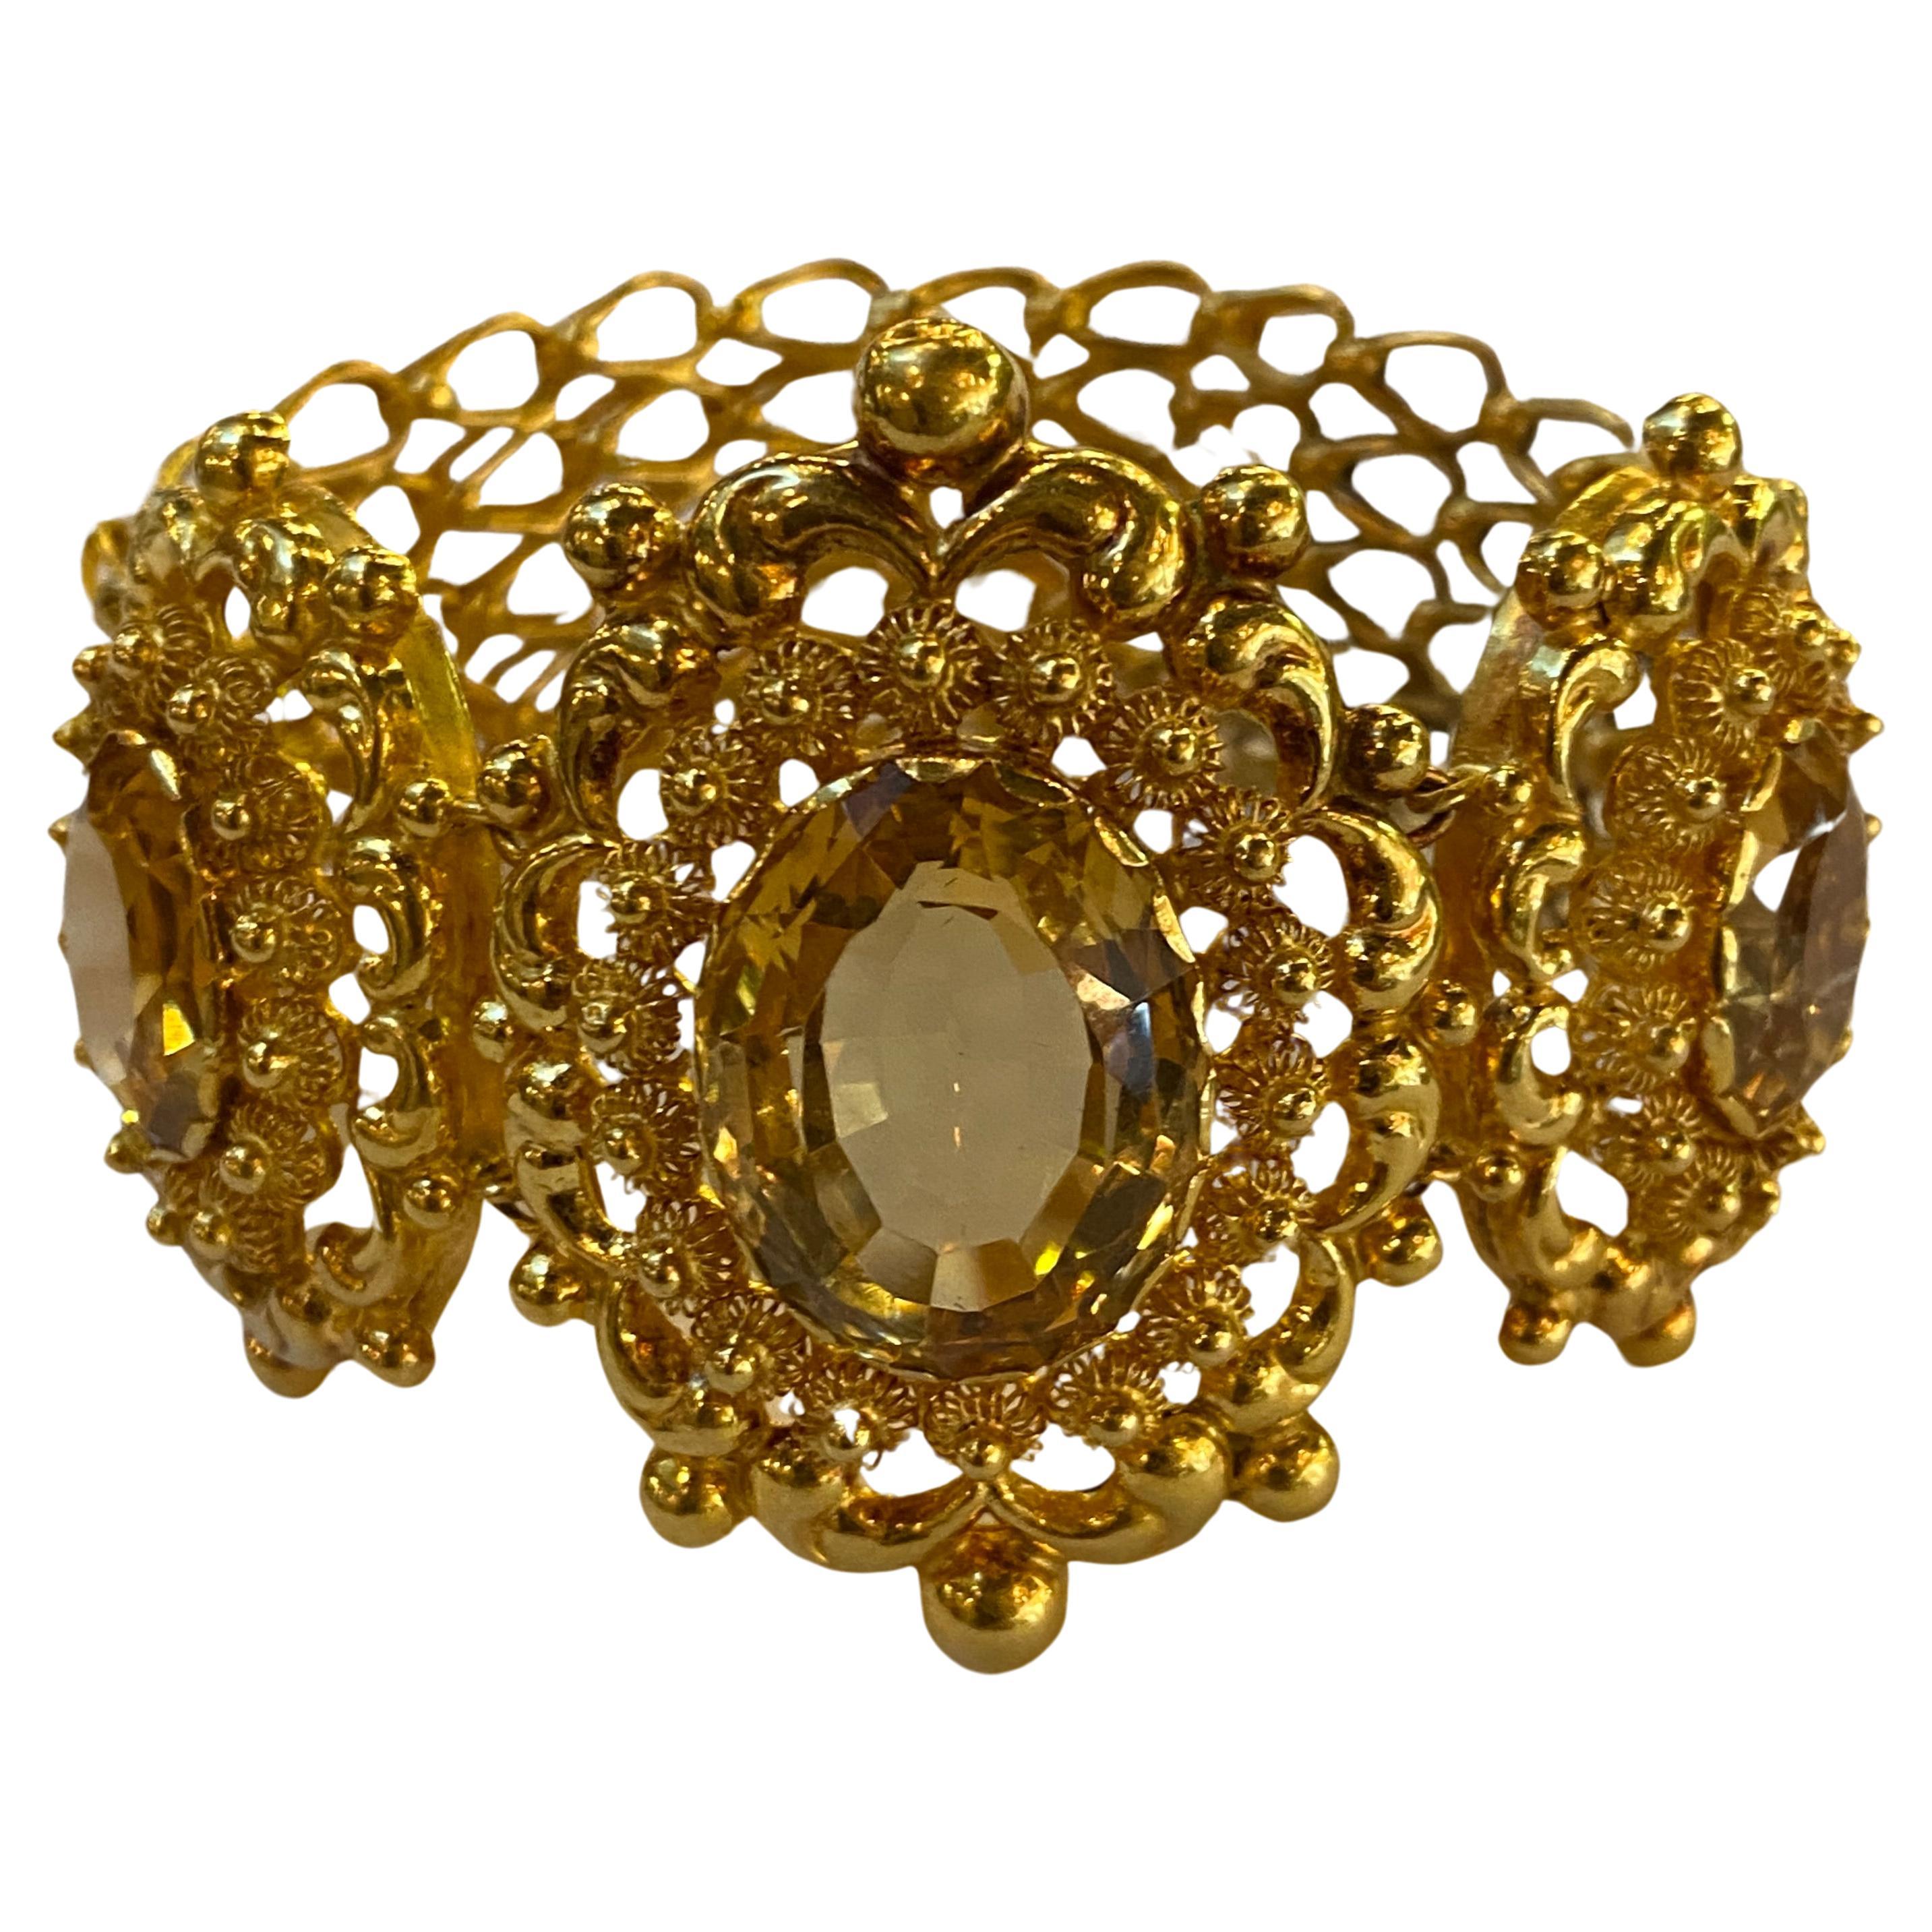 A stunning, fine and impressive 25 carat citrine and 18 carat yellow gold link bracelet

This antique bracelet features three large oval faceted yellow citrines, the largest at 15 carats and the two flanking the center are 5 carats each. Each gem is